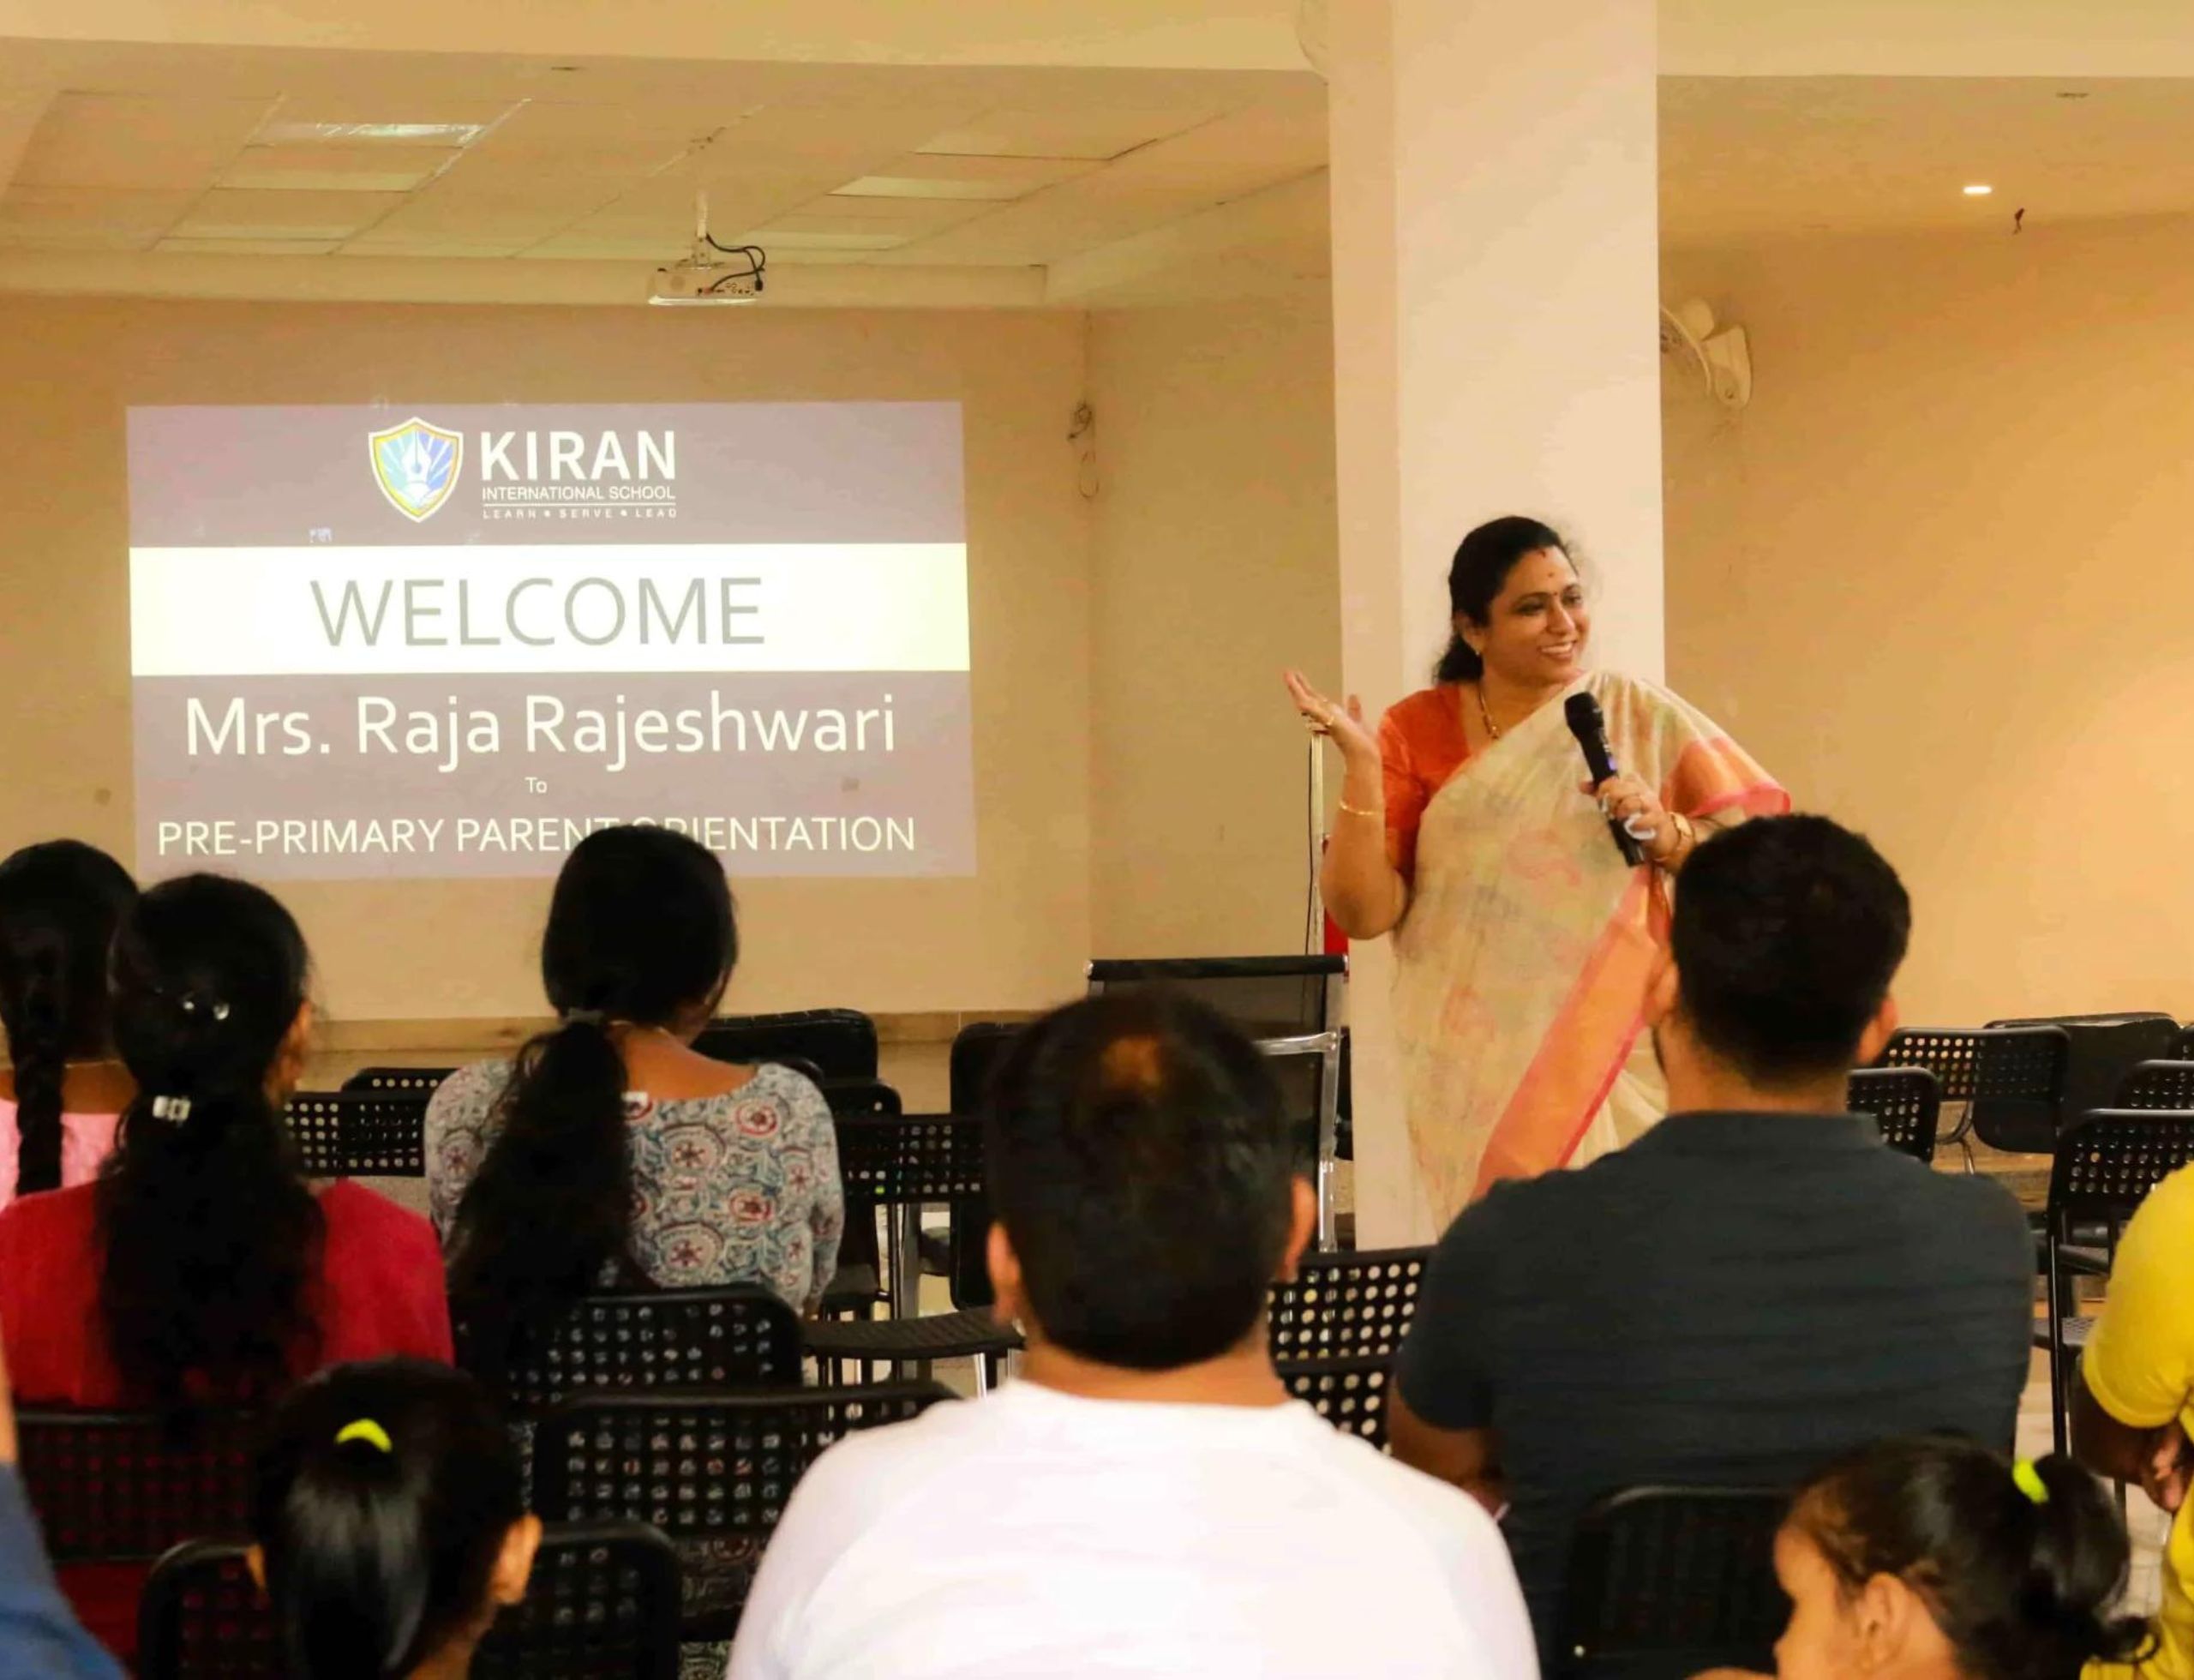 A photo from a Parent Counseling Session at Kiran International School, illustrating the proactive engagement of parents in the education process, fostering collaboration between home and school for the benefit of the students.